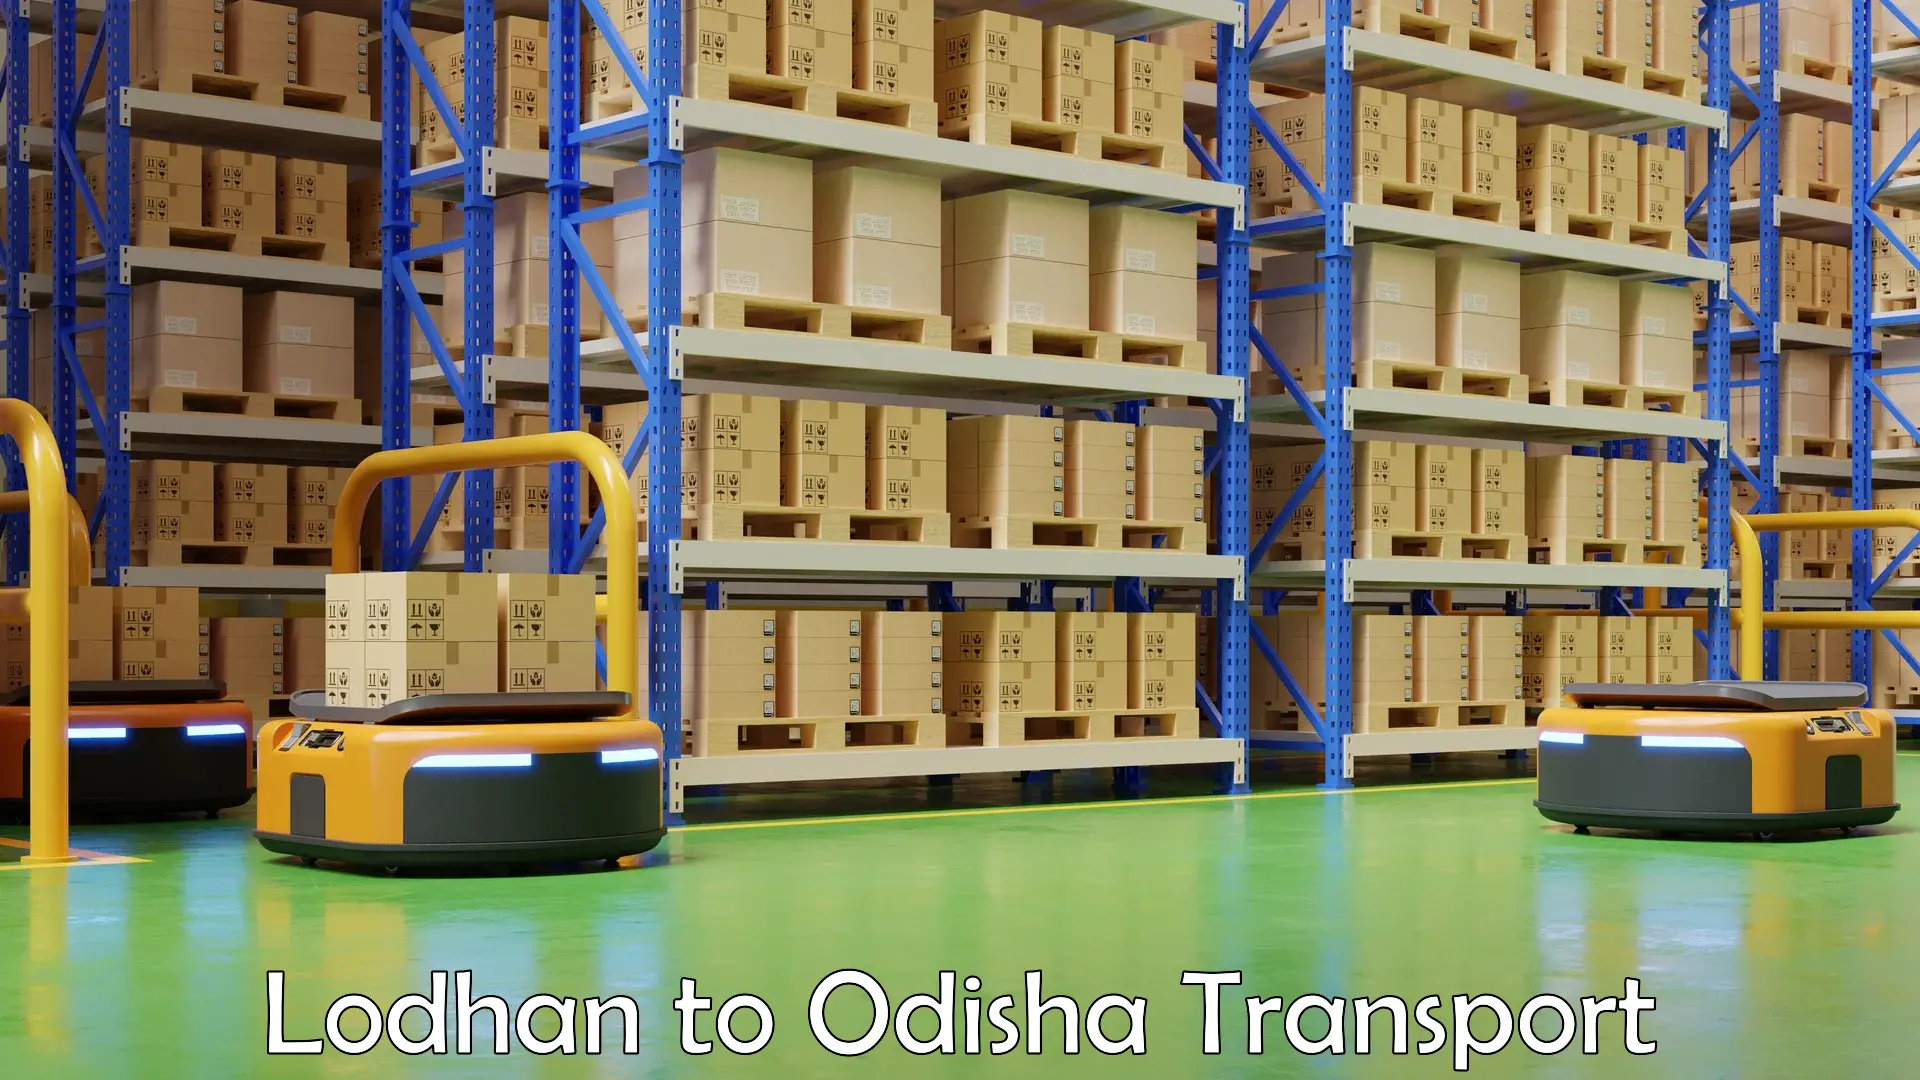 Daily parcel service transport Lodhan to Odisha